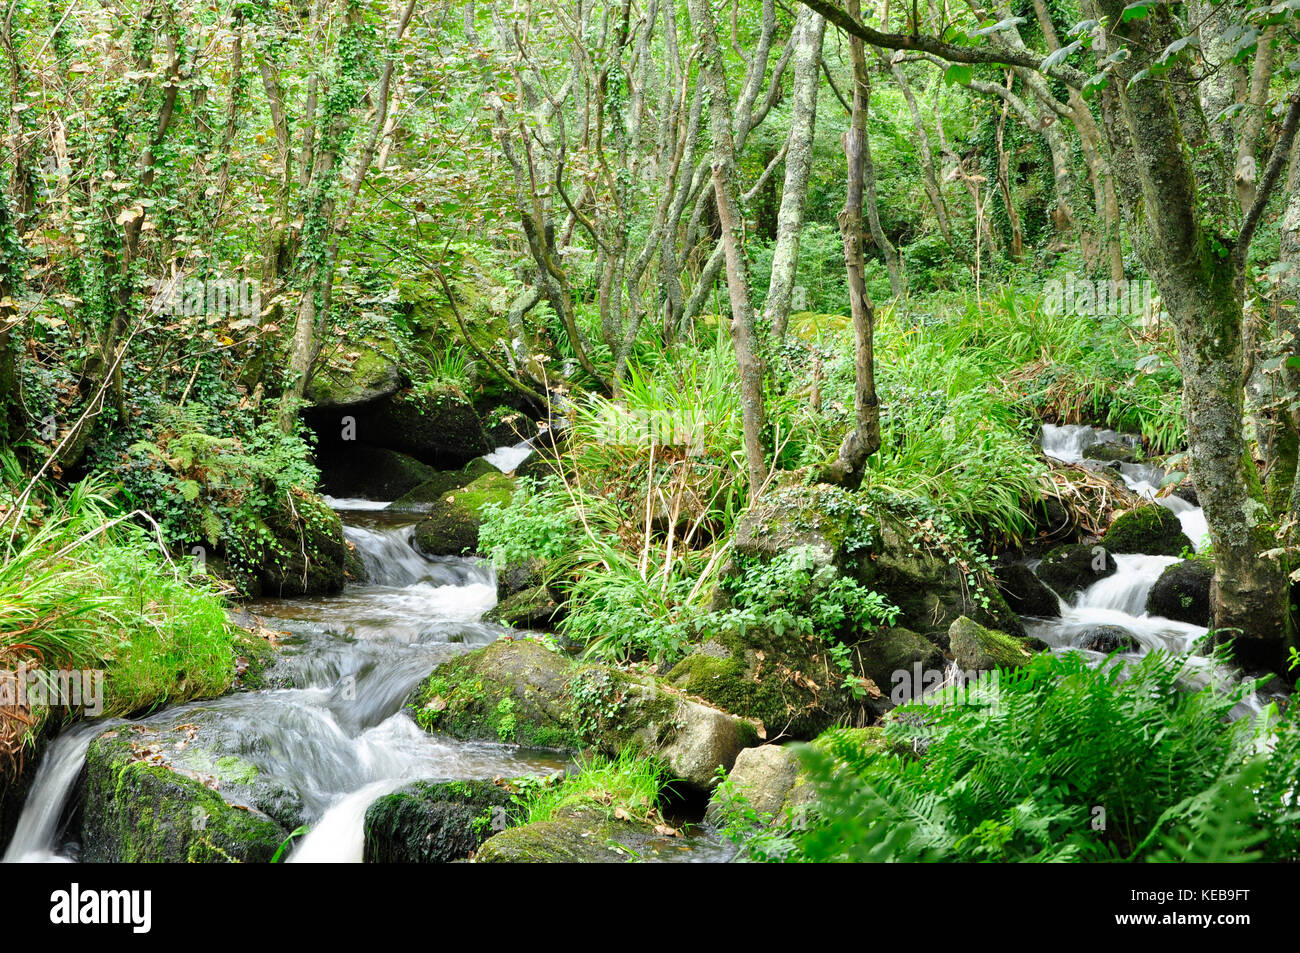 Stream tumbling through woodland before it enters the sea in Lamorna Cove, West Penwith, Cornwall.UK Stock Photo